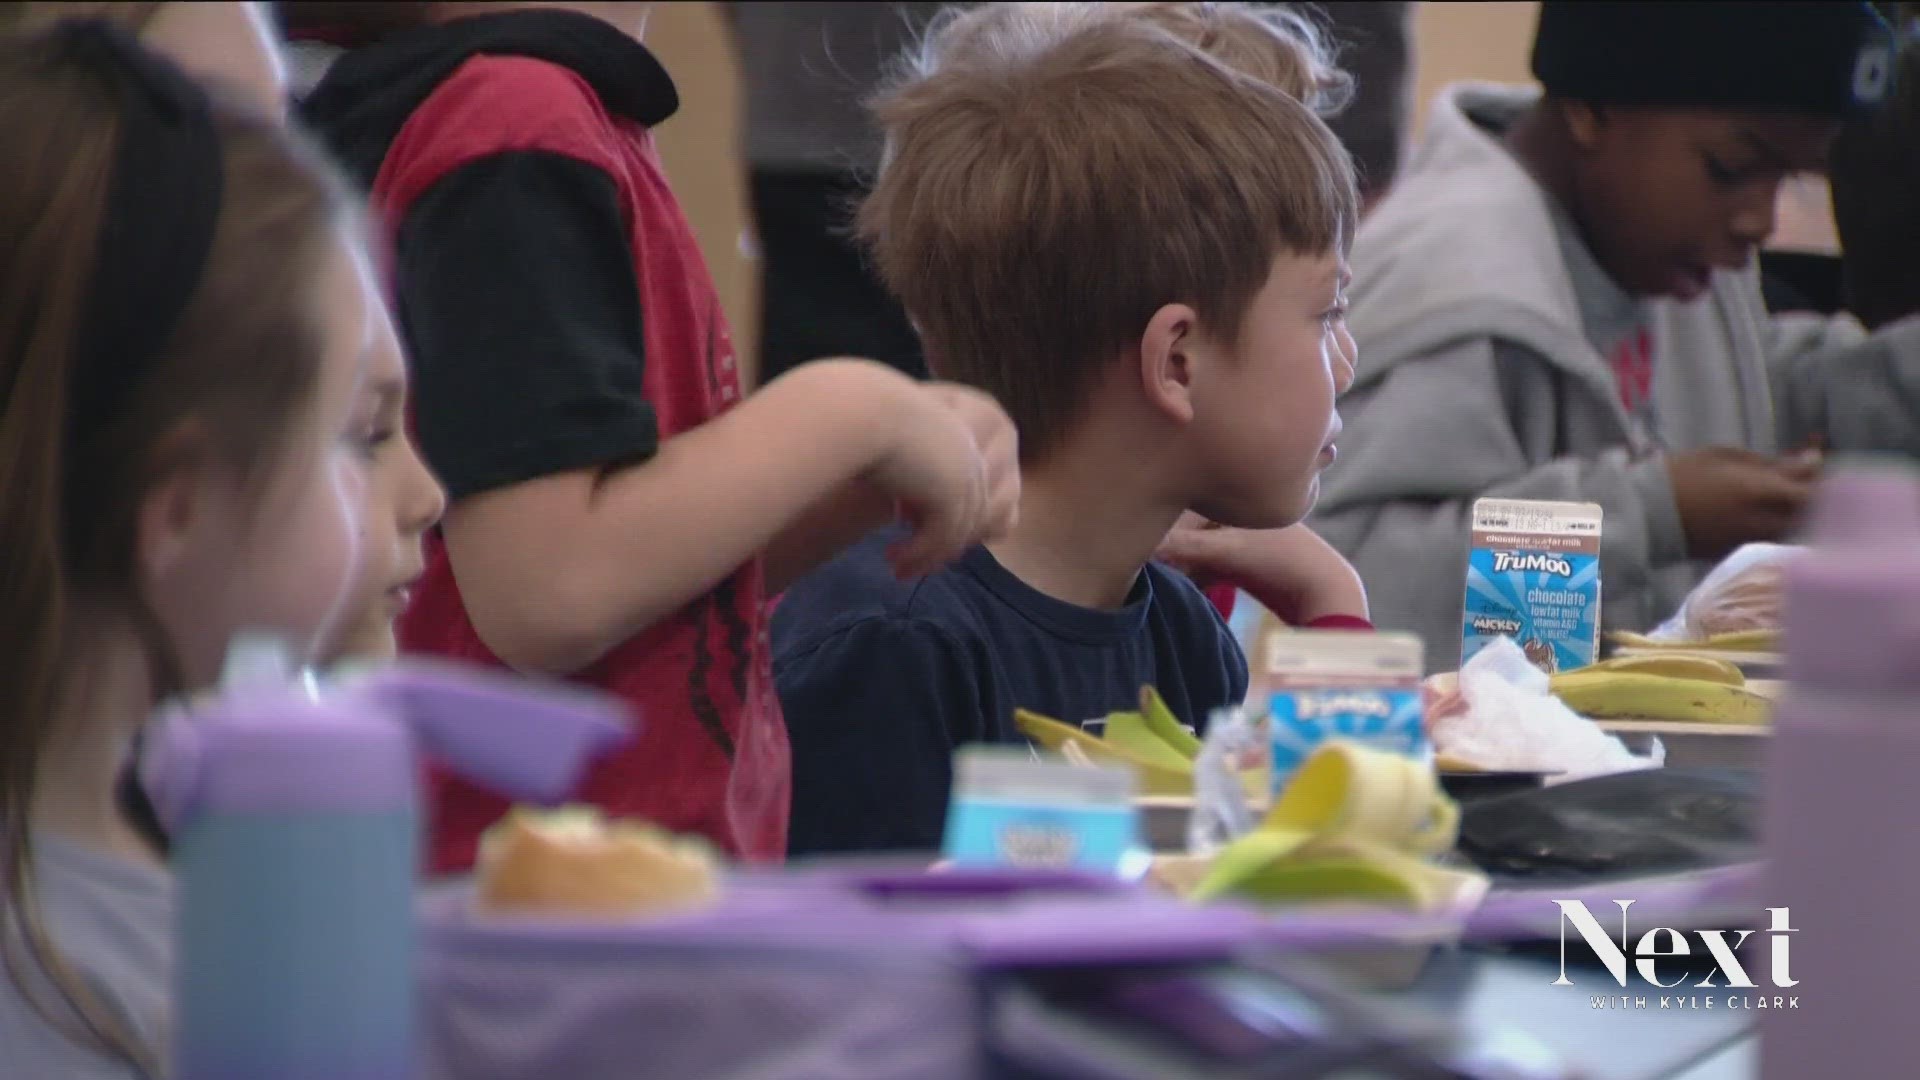 Colorado voters approved free school meals two years ago. Now, that program is underfunded, and lawmakers have decisions to make on what promises to keep.